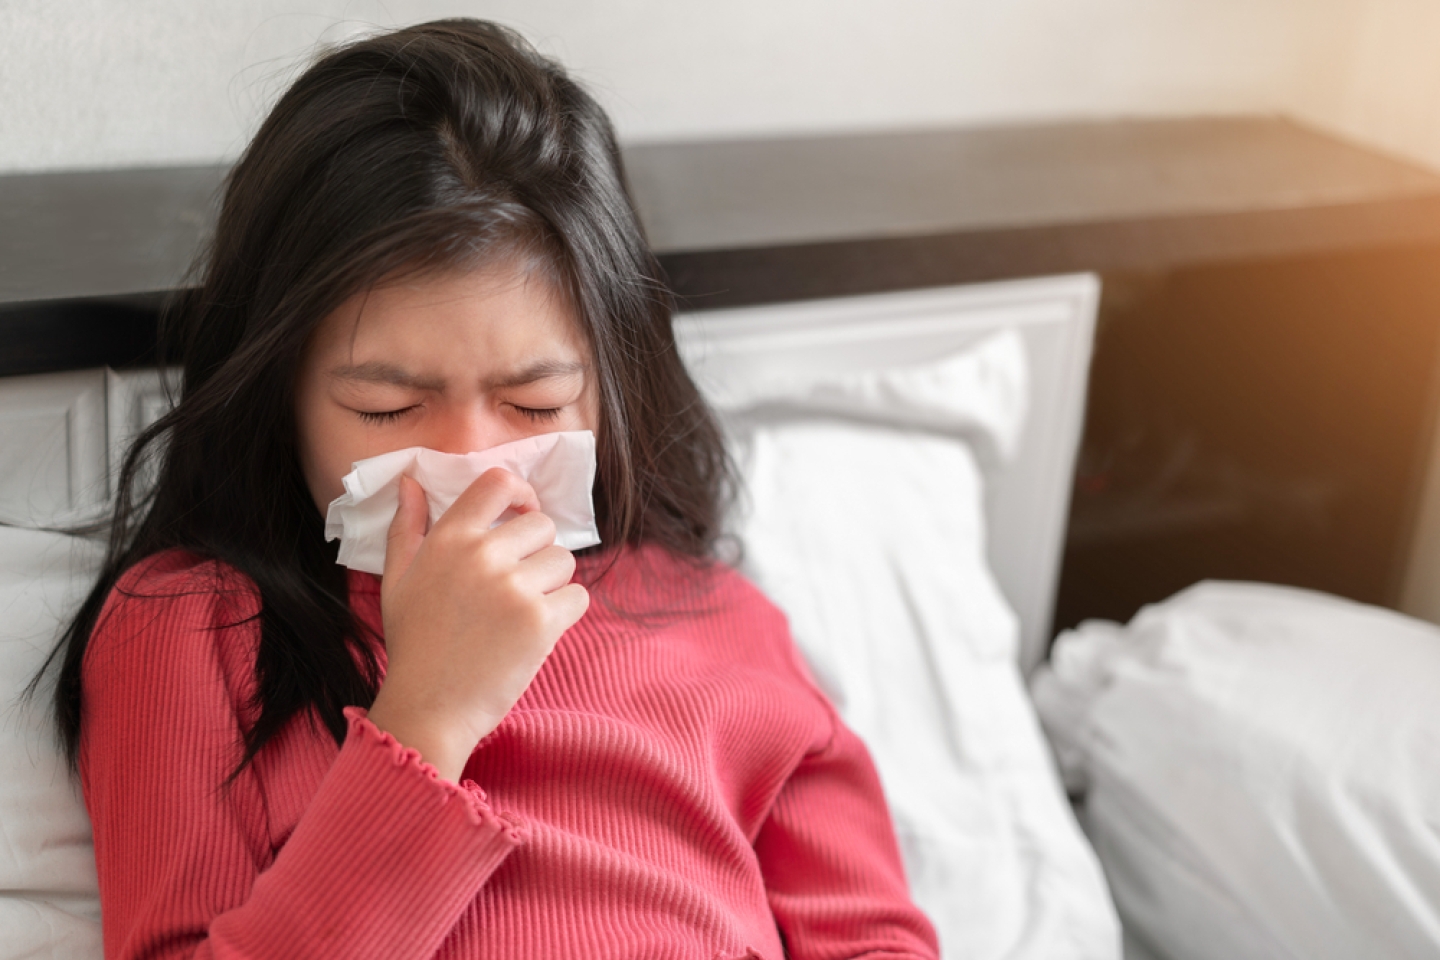 Sick girl sneezing into tissue on bed in bedroom